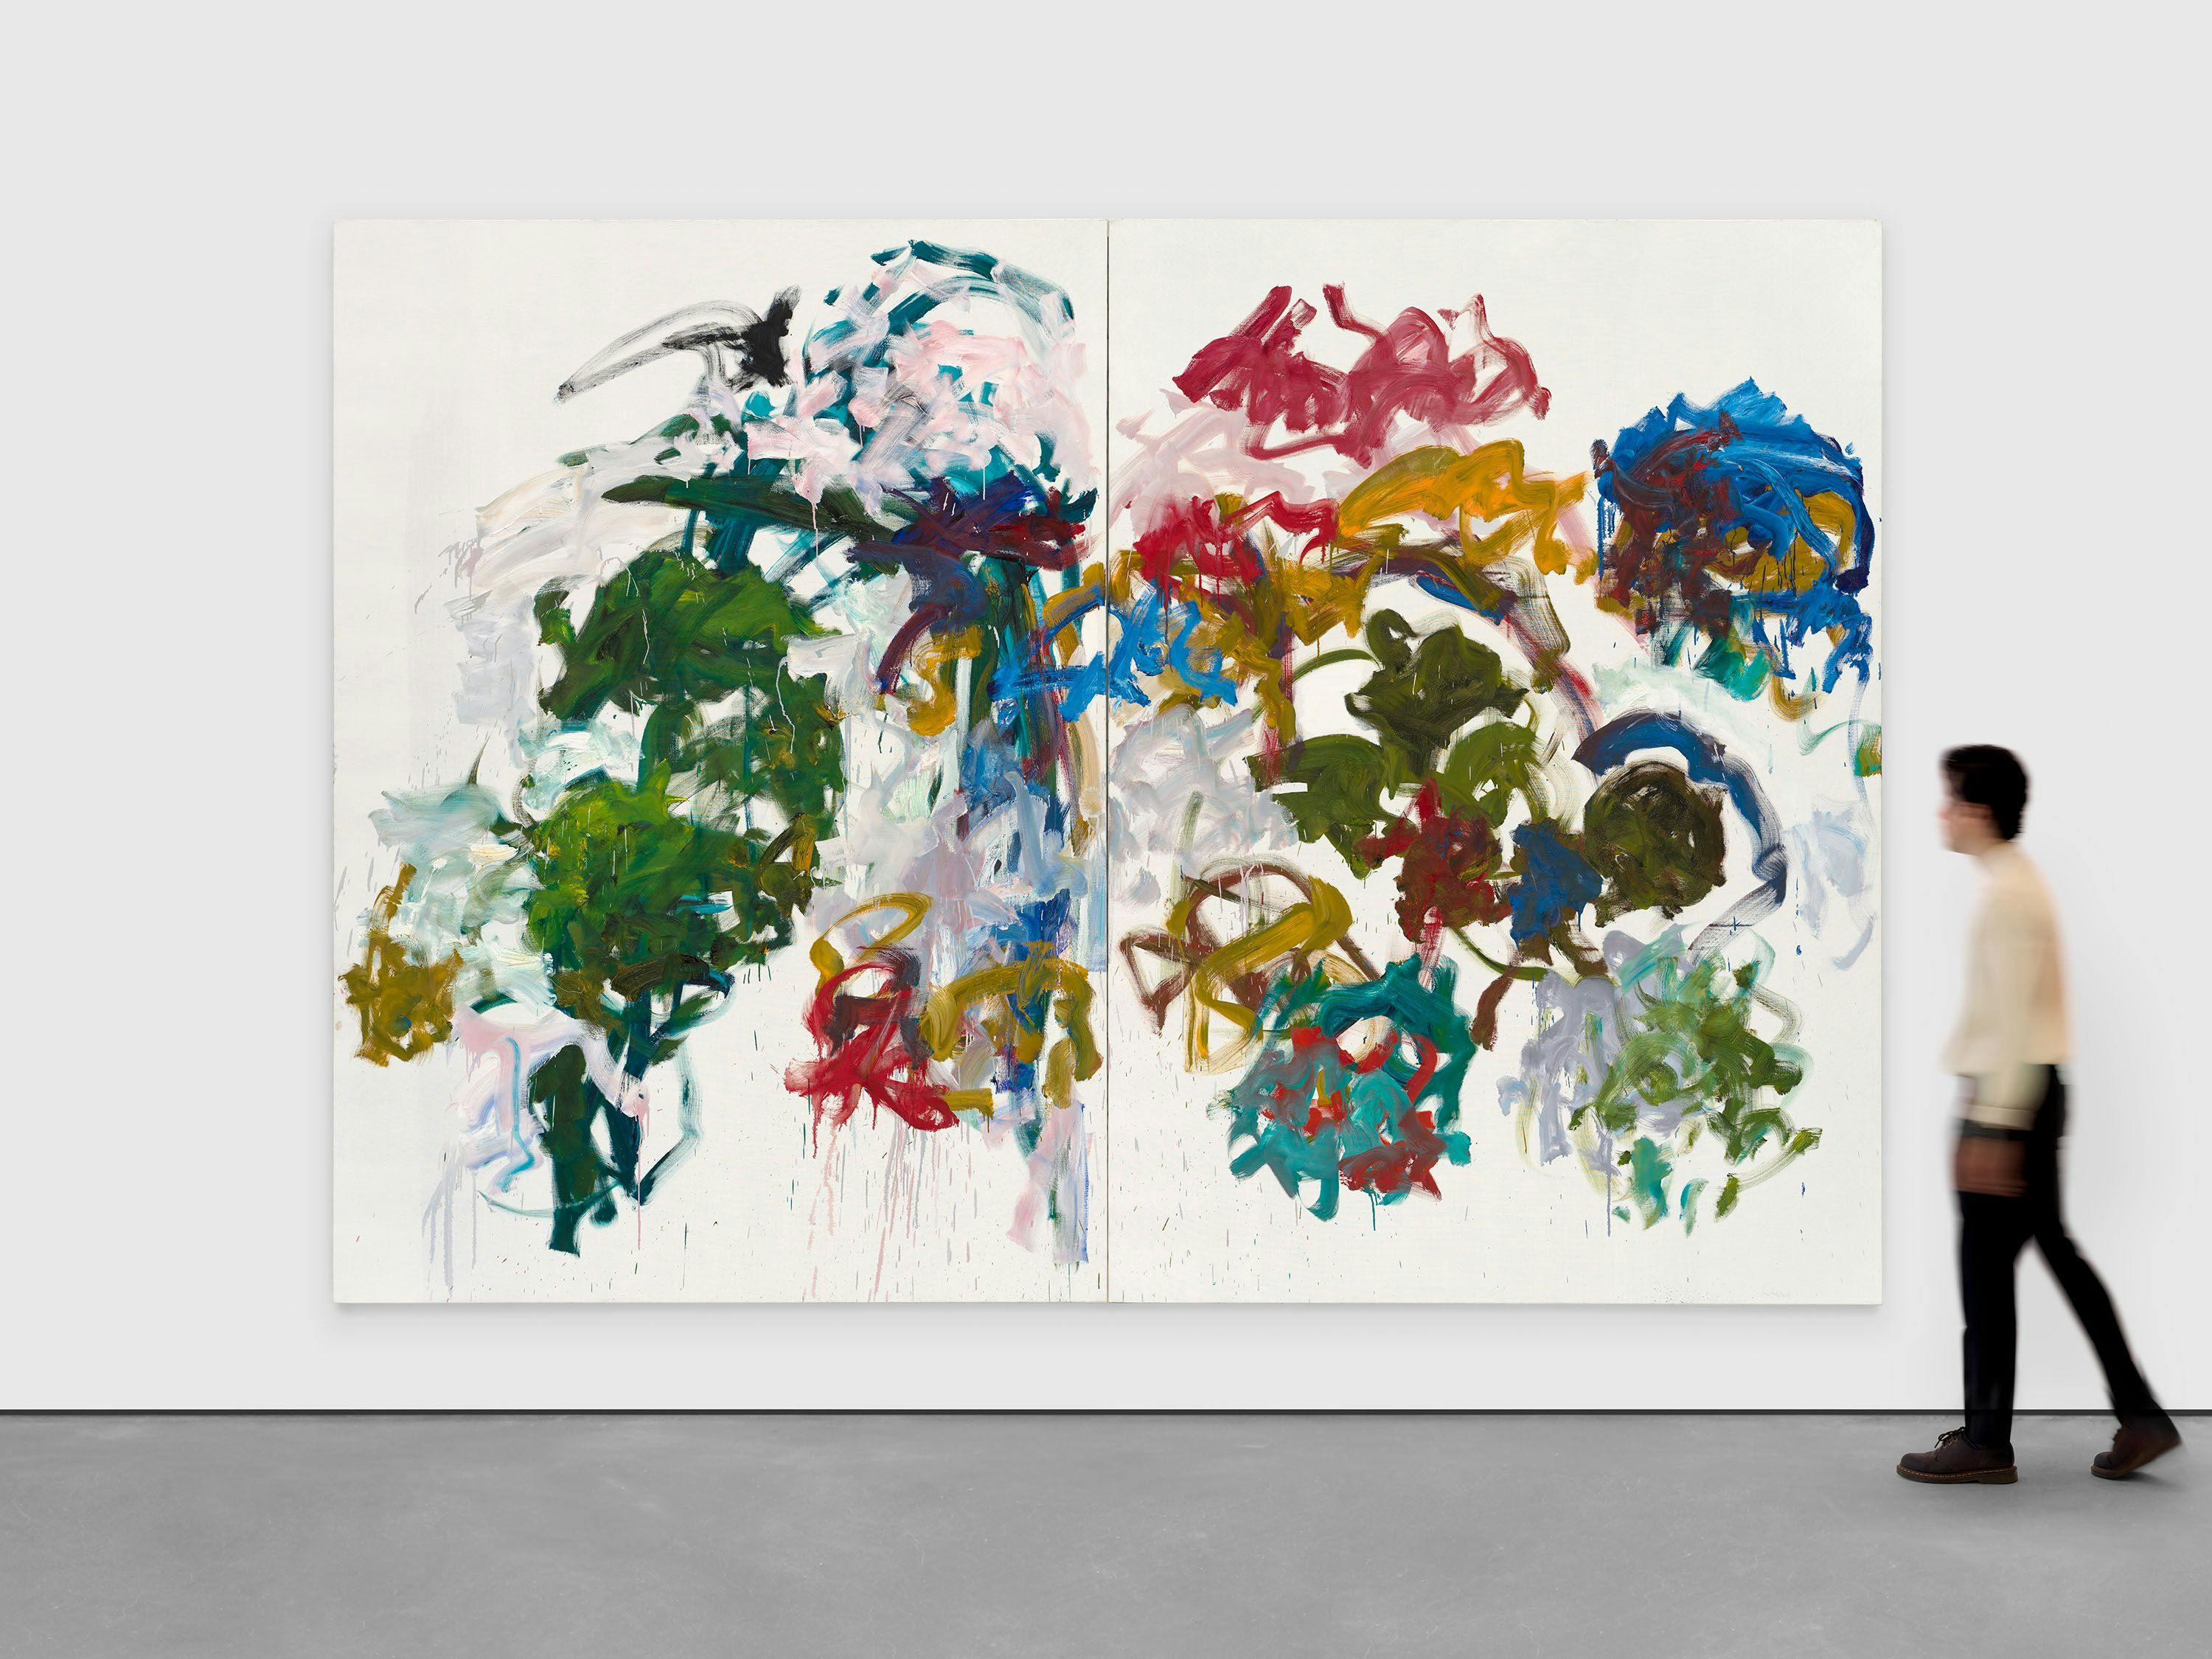 A painting by Joan Mitchell, titled Sunflowers, 1990 to 1991.